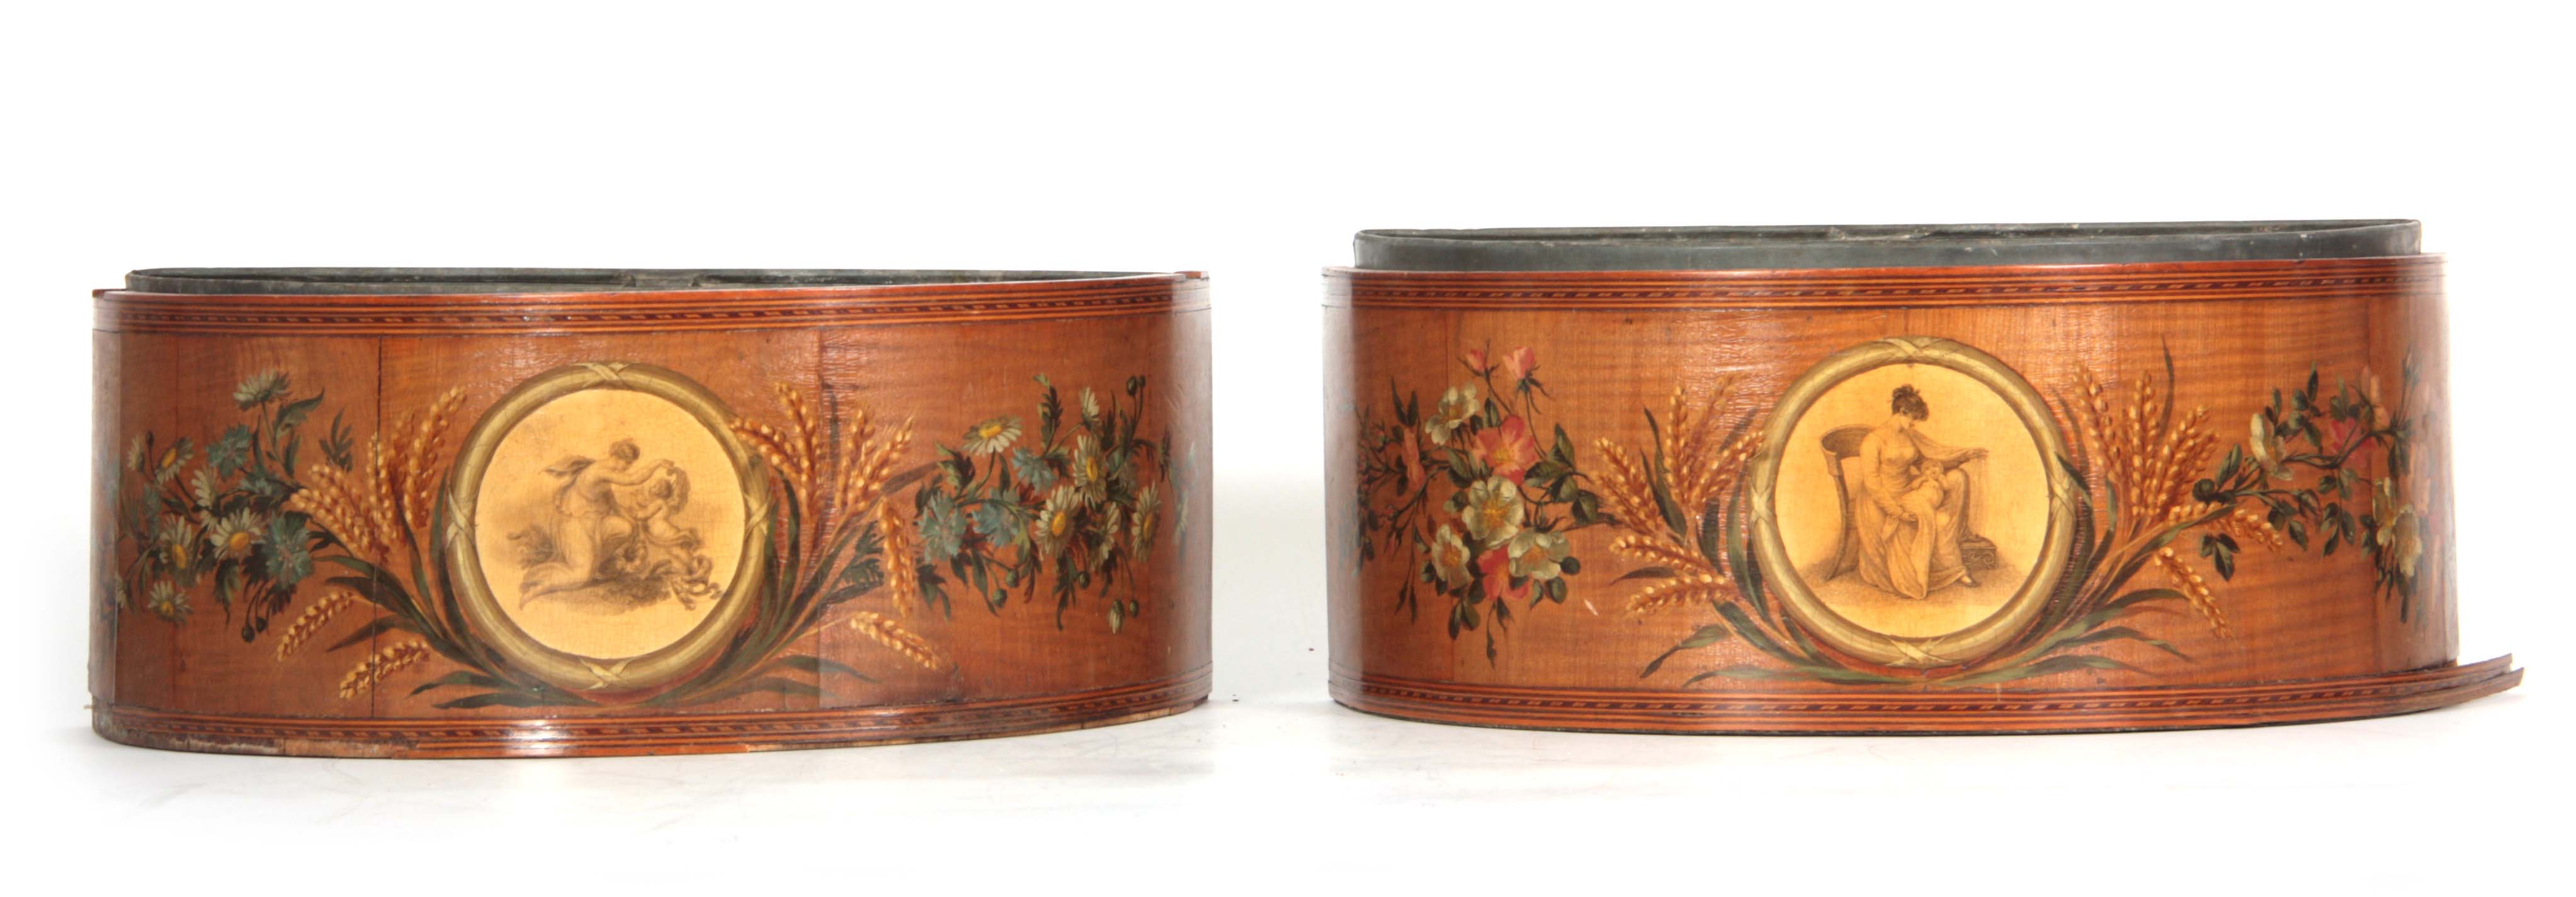 A PAIR OF GEORGE III SHERATON STYLE DEMI LUME PAINTED HAREWOOD BOUGH POTS with classical circular